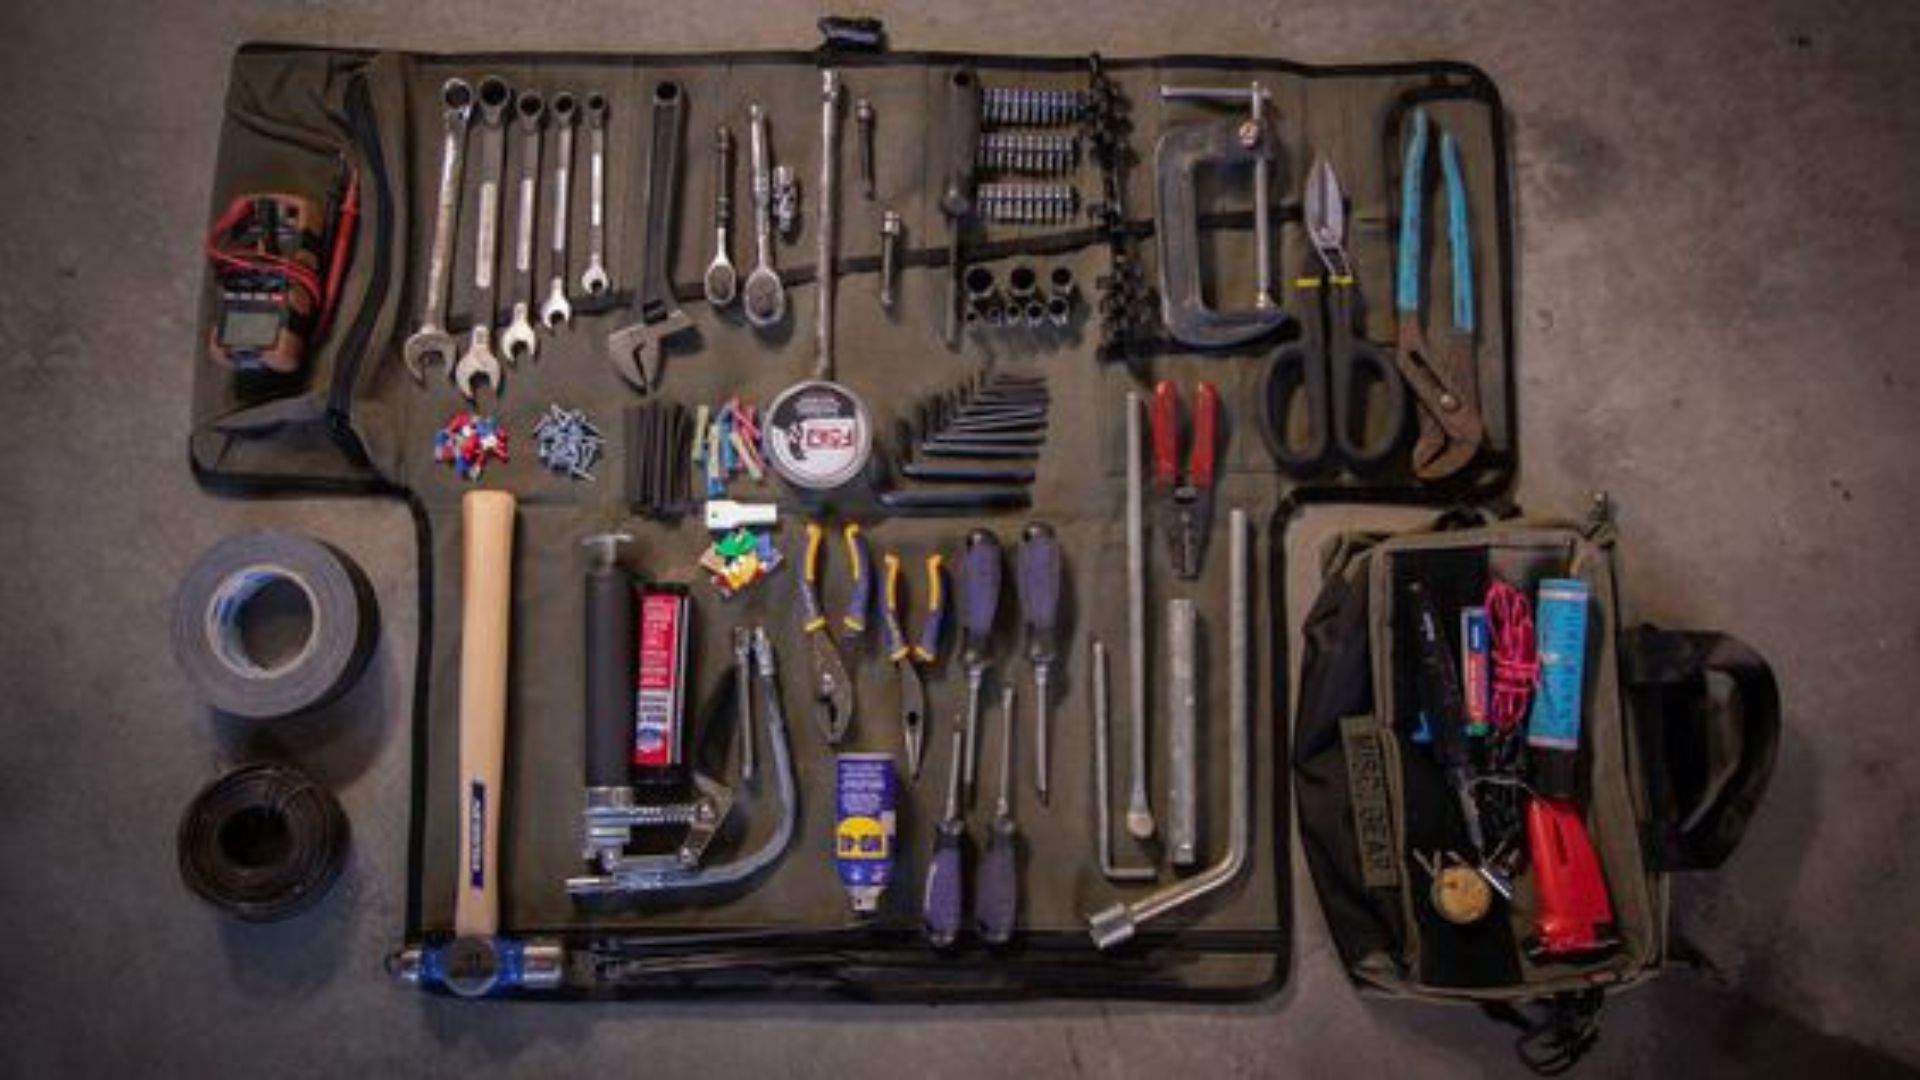 Arrangement of tools in a tool pouch.